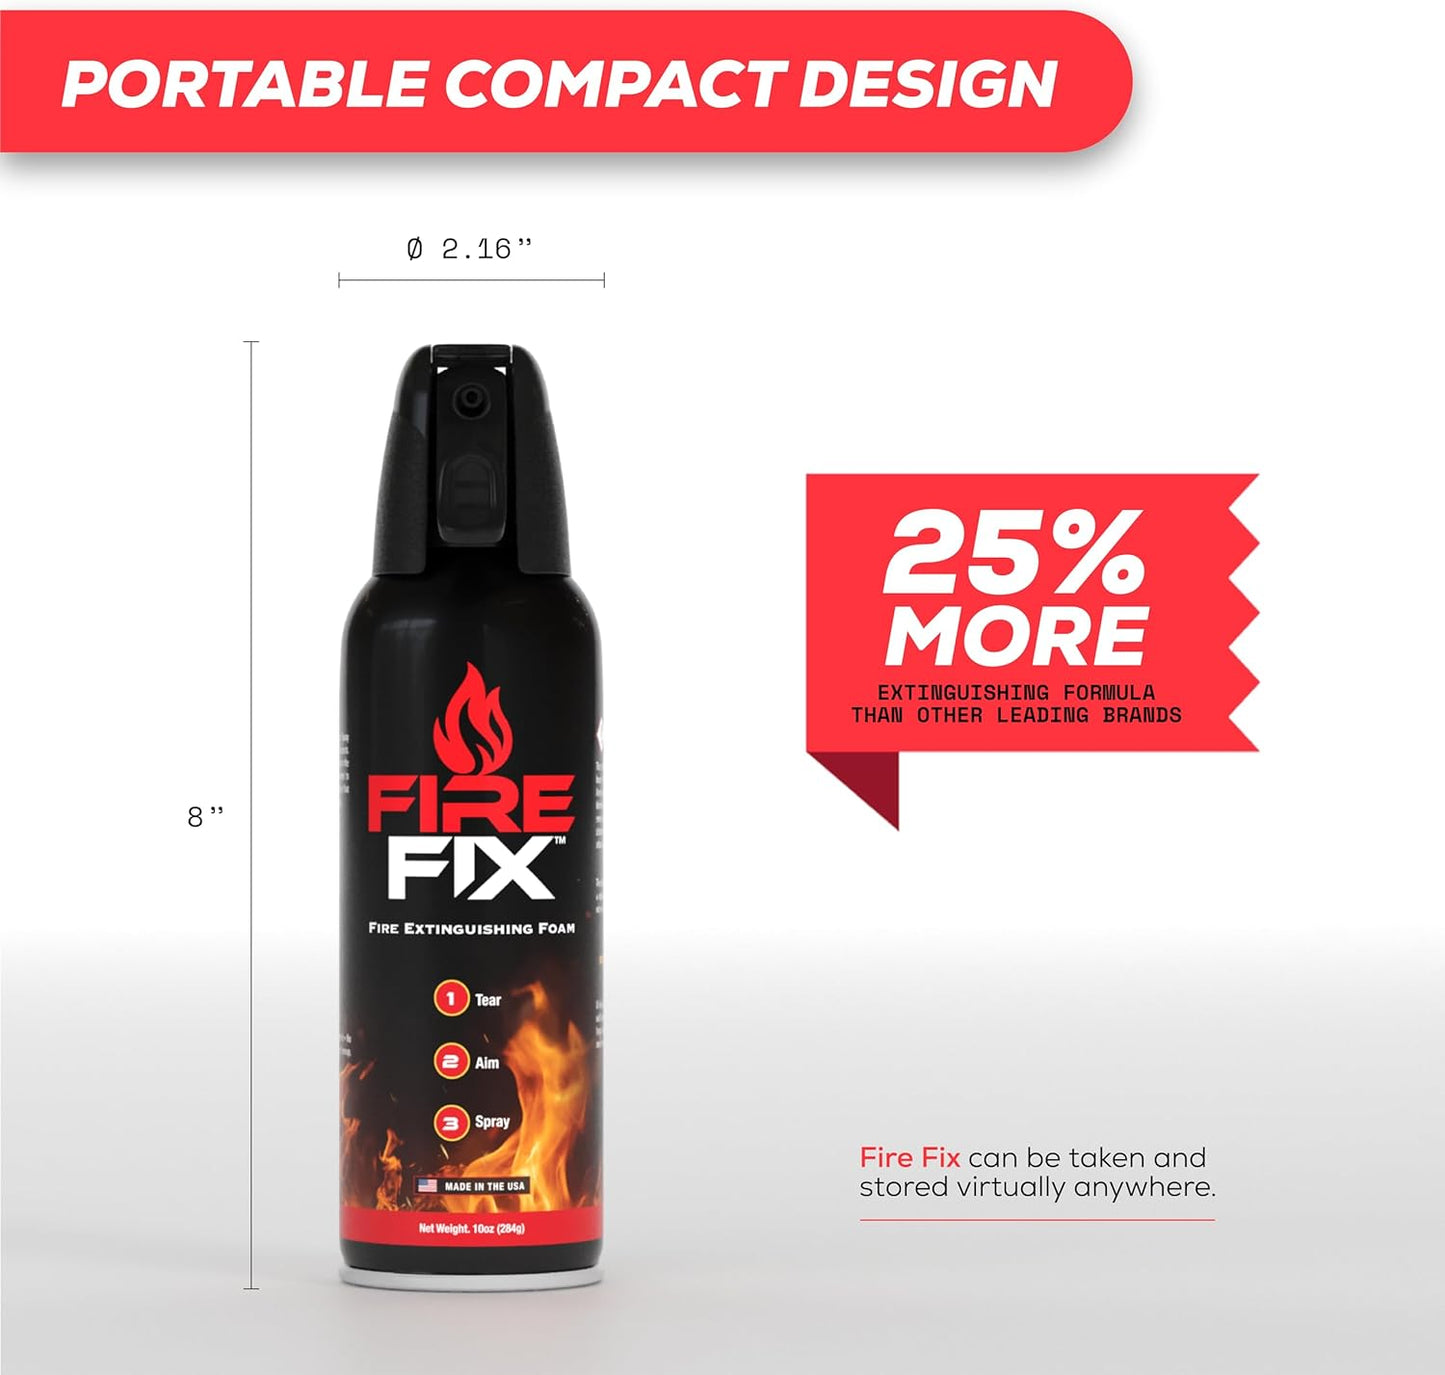 Portable and compact Fire Fix fire extinguisher foam with 25% more extinguishing formula, perfect for on-the-go fire emergencies.